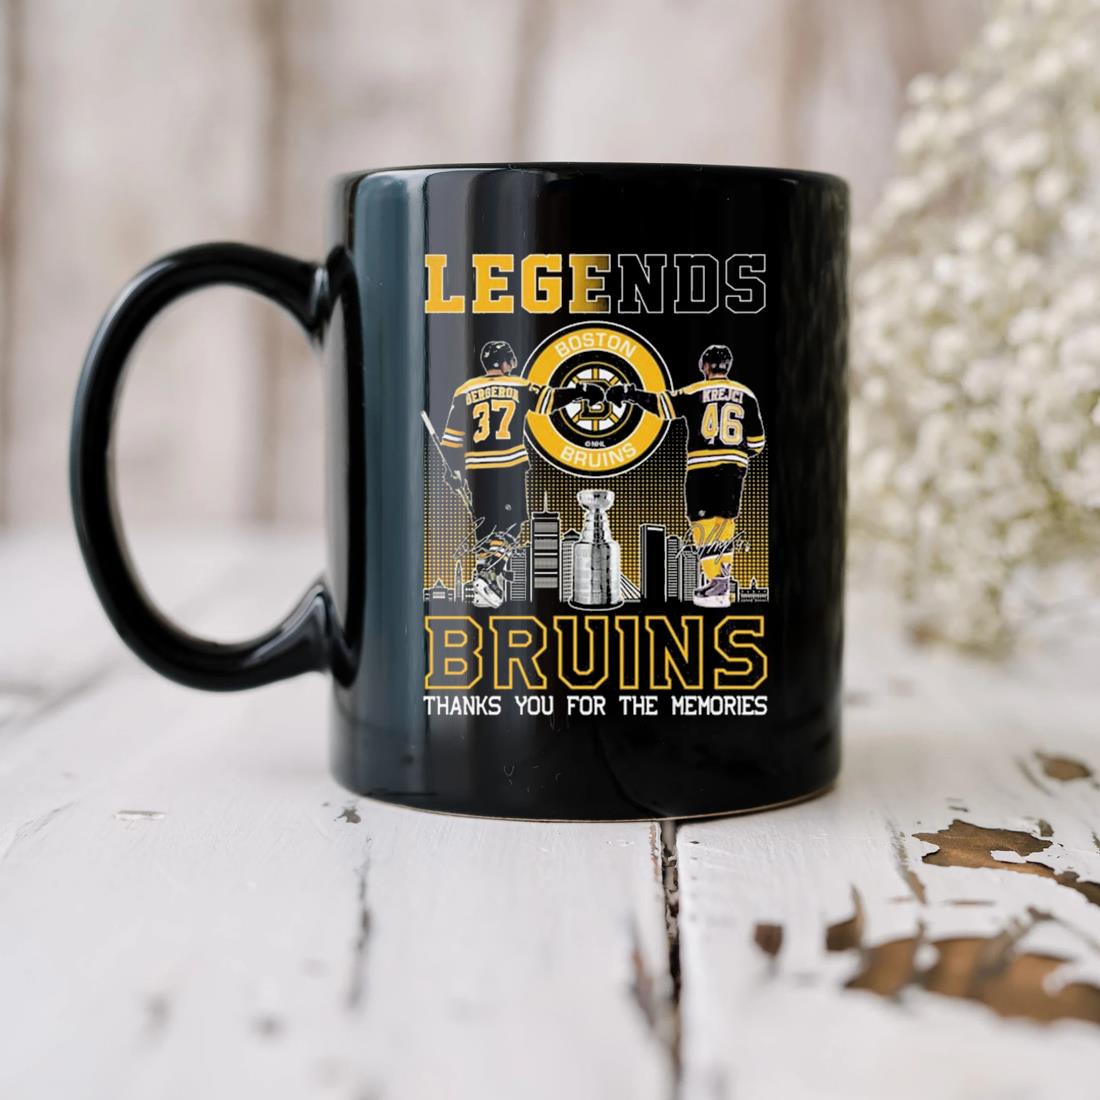 Legend Bergeron And Krejci Boston Bruins Thank You For The Memories  Signatures Shirt, hoodie, sweater, long sleeve and tank top